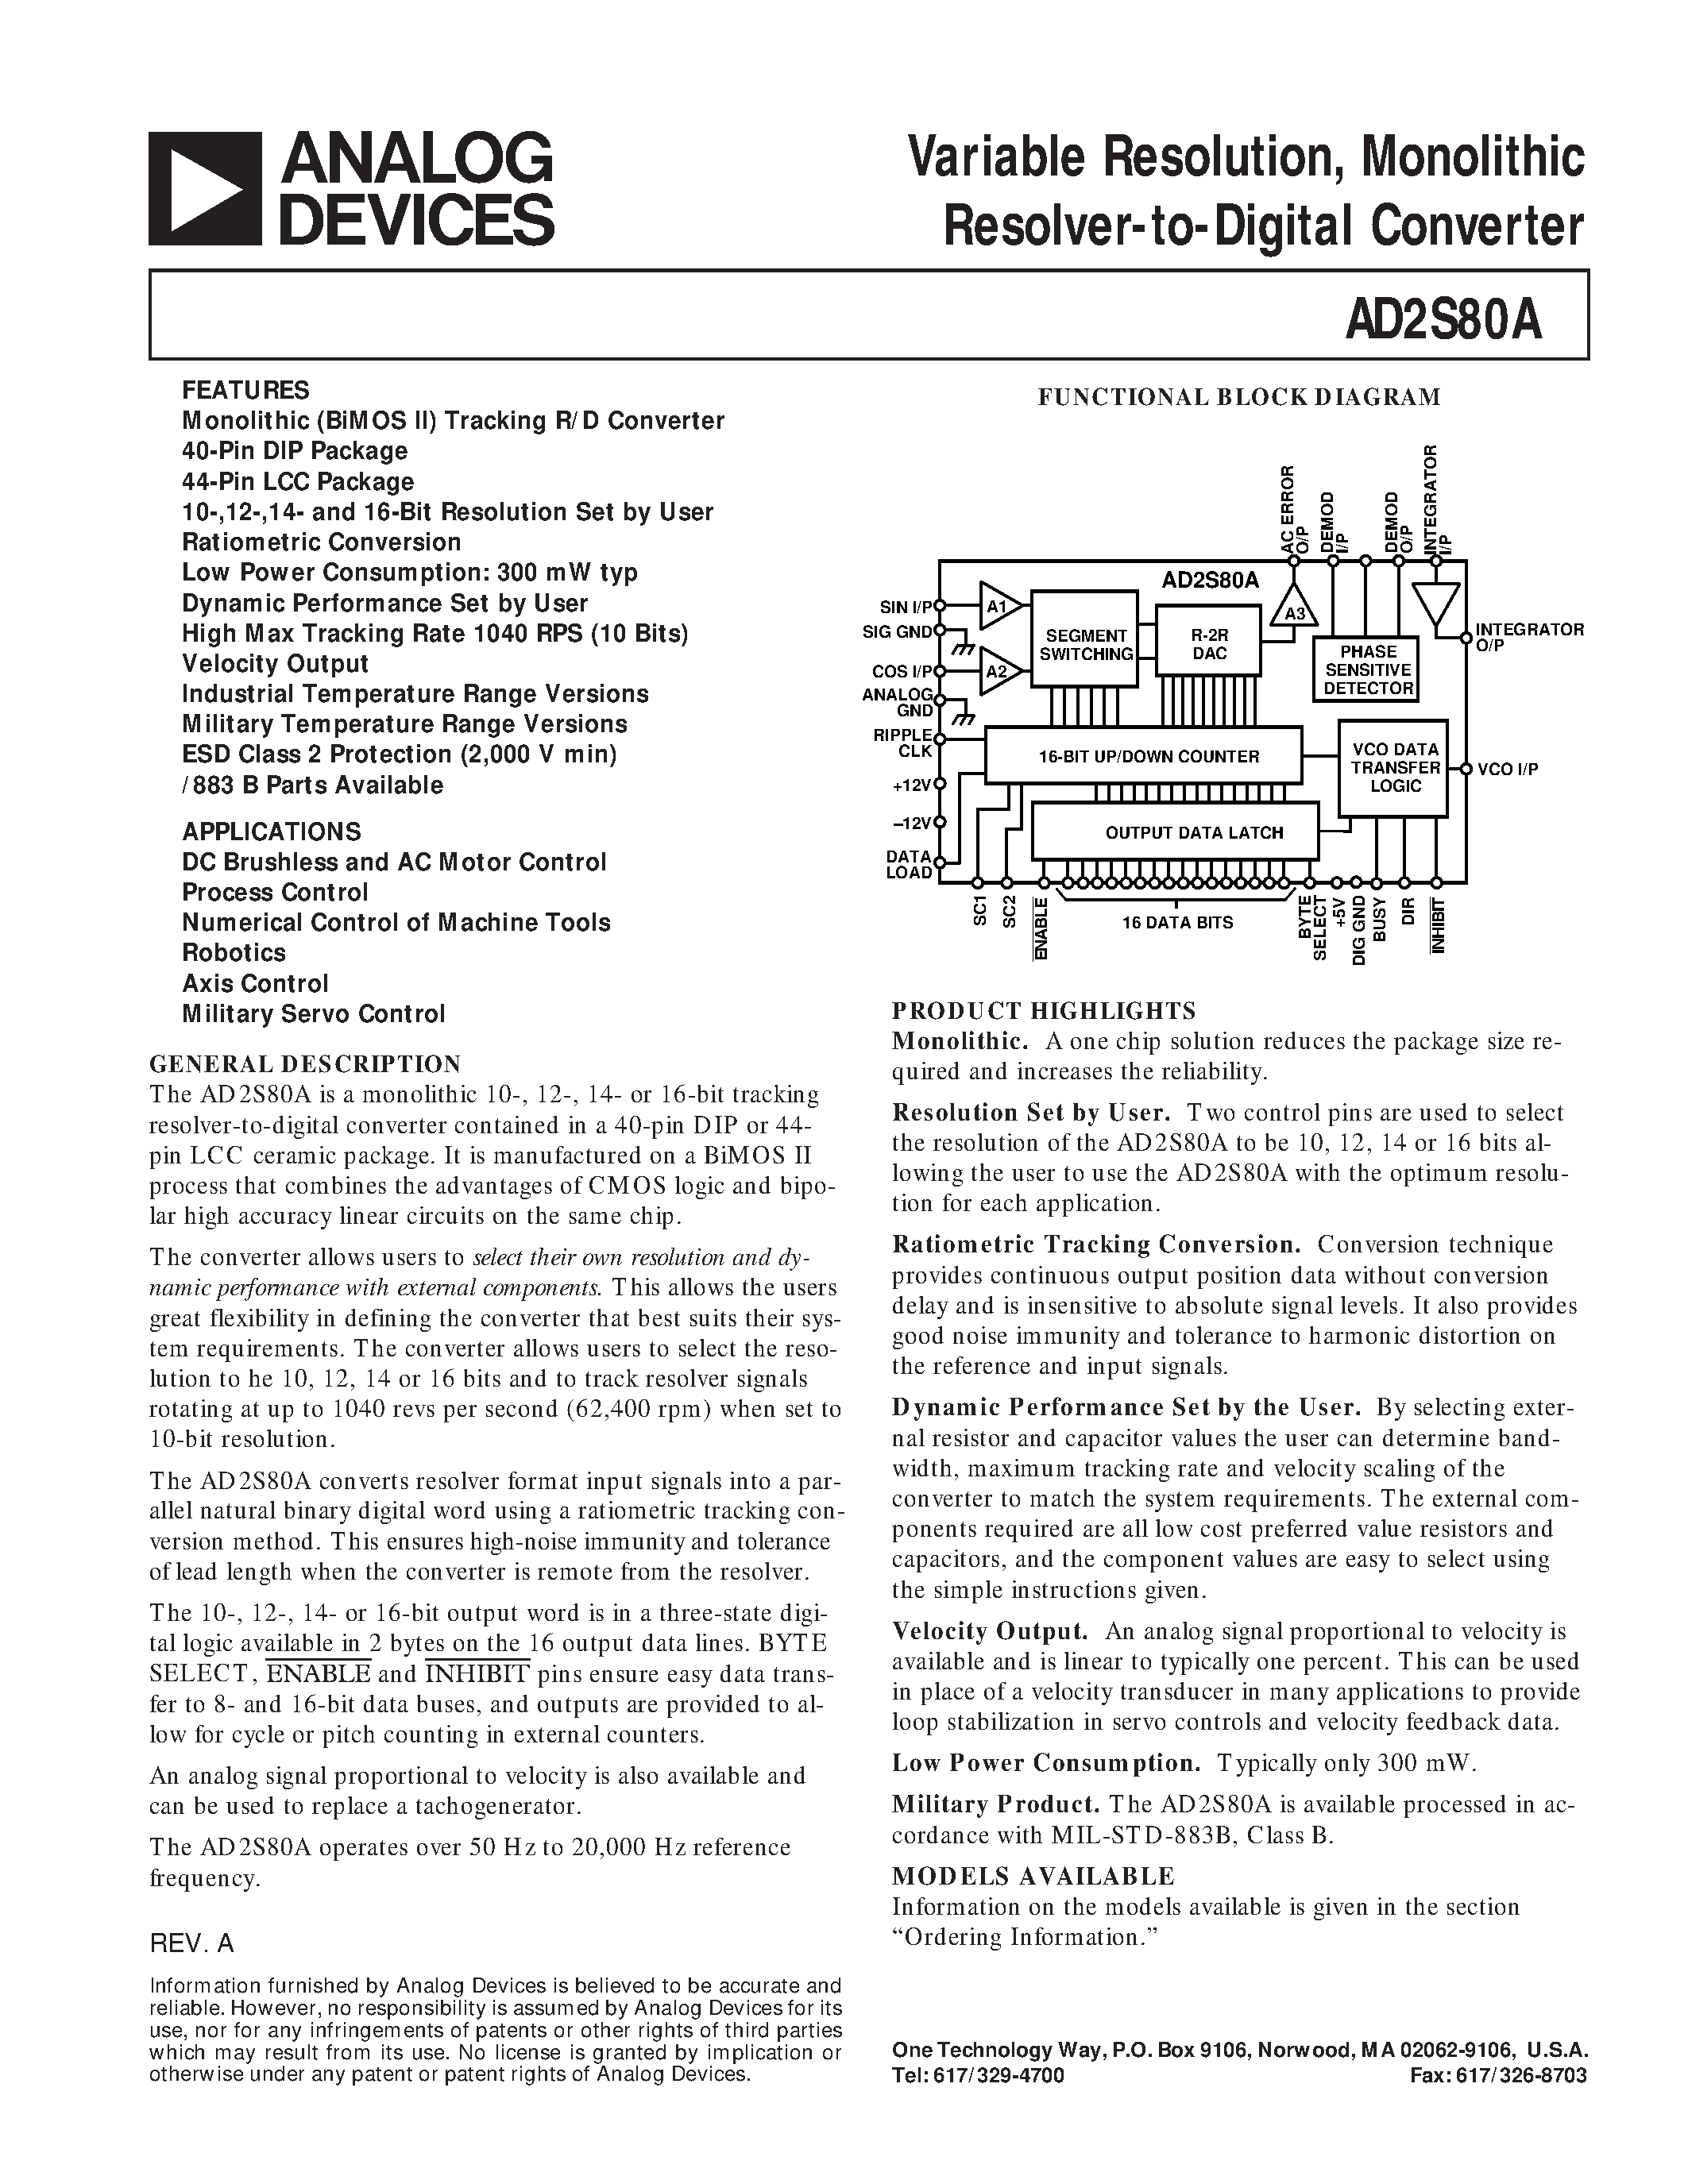 Datasheet AD2S80ATE/883B - Variable Resolution/ Monolithic Resolver-to-Digital Converter page 1